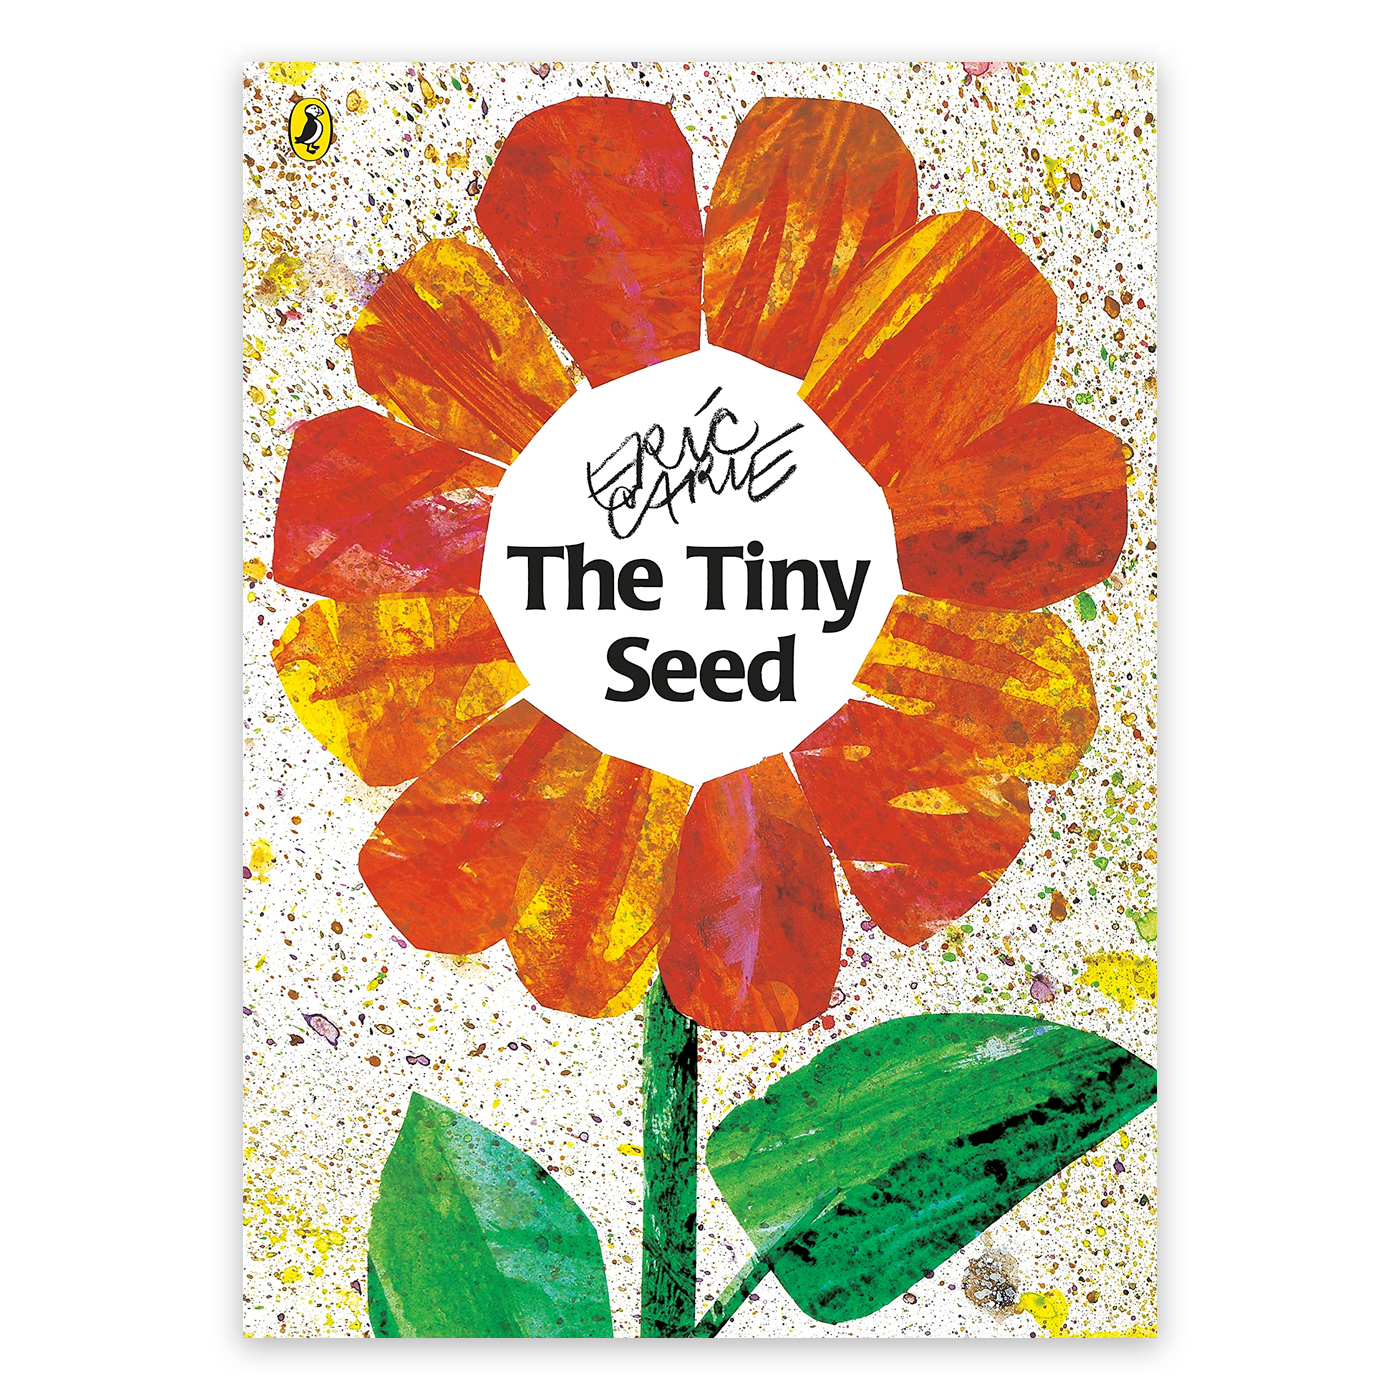  The Tiny Seed